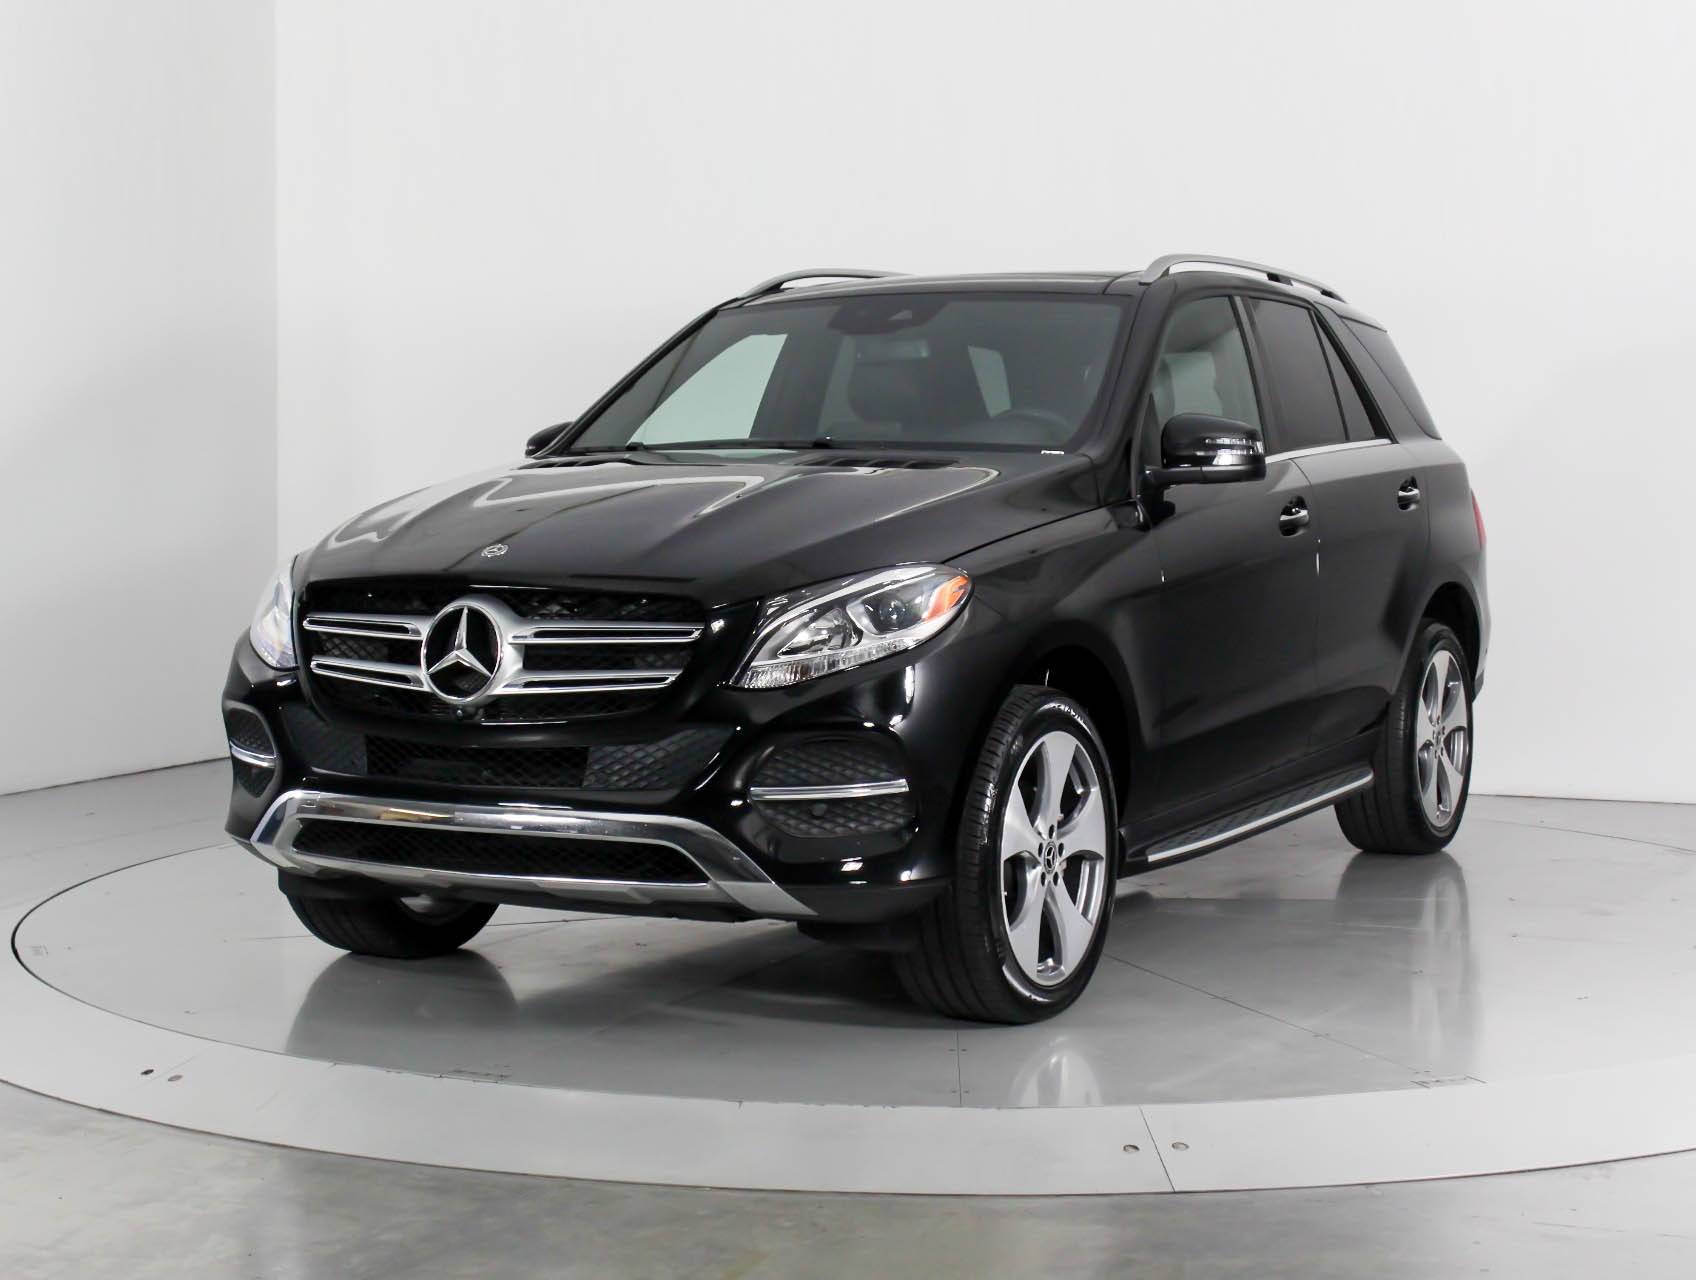 Used 2017 Mercedes Benz Gle Class Gle350 Suv For Sale In